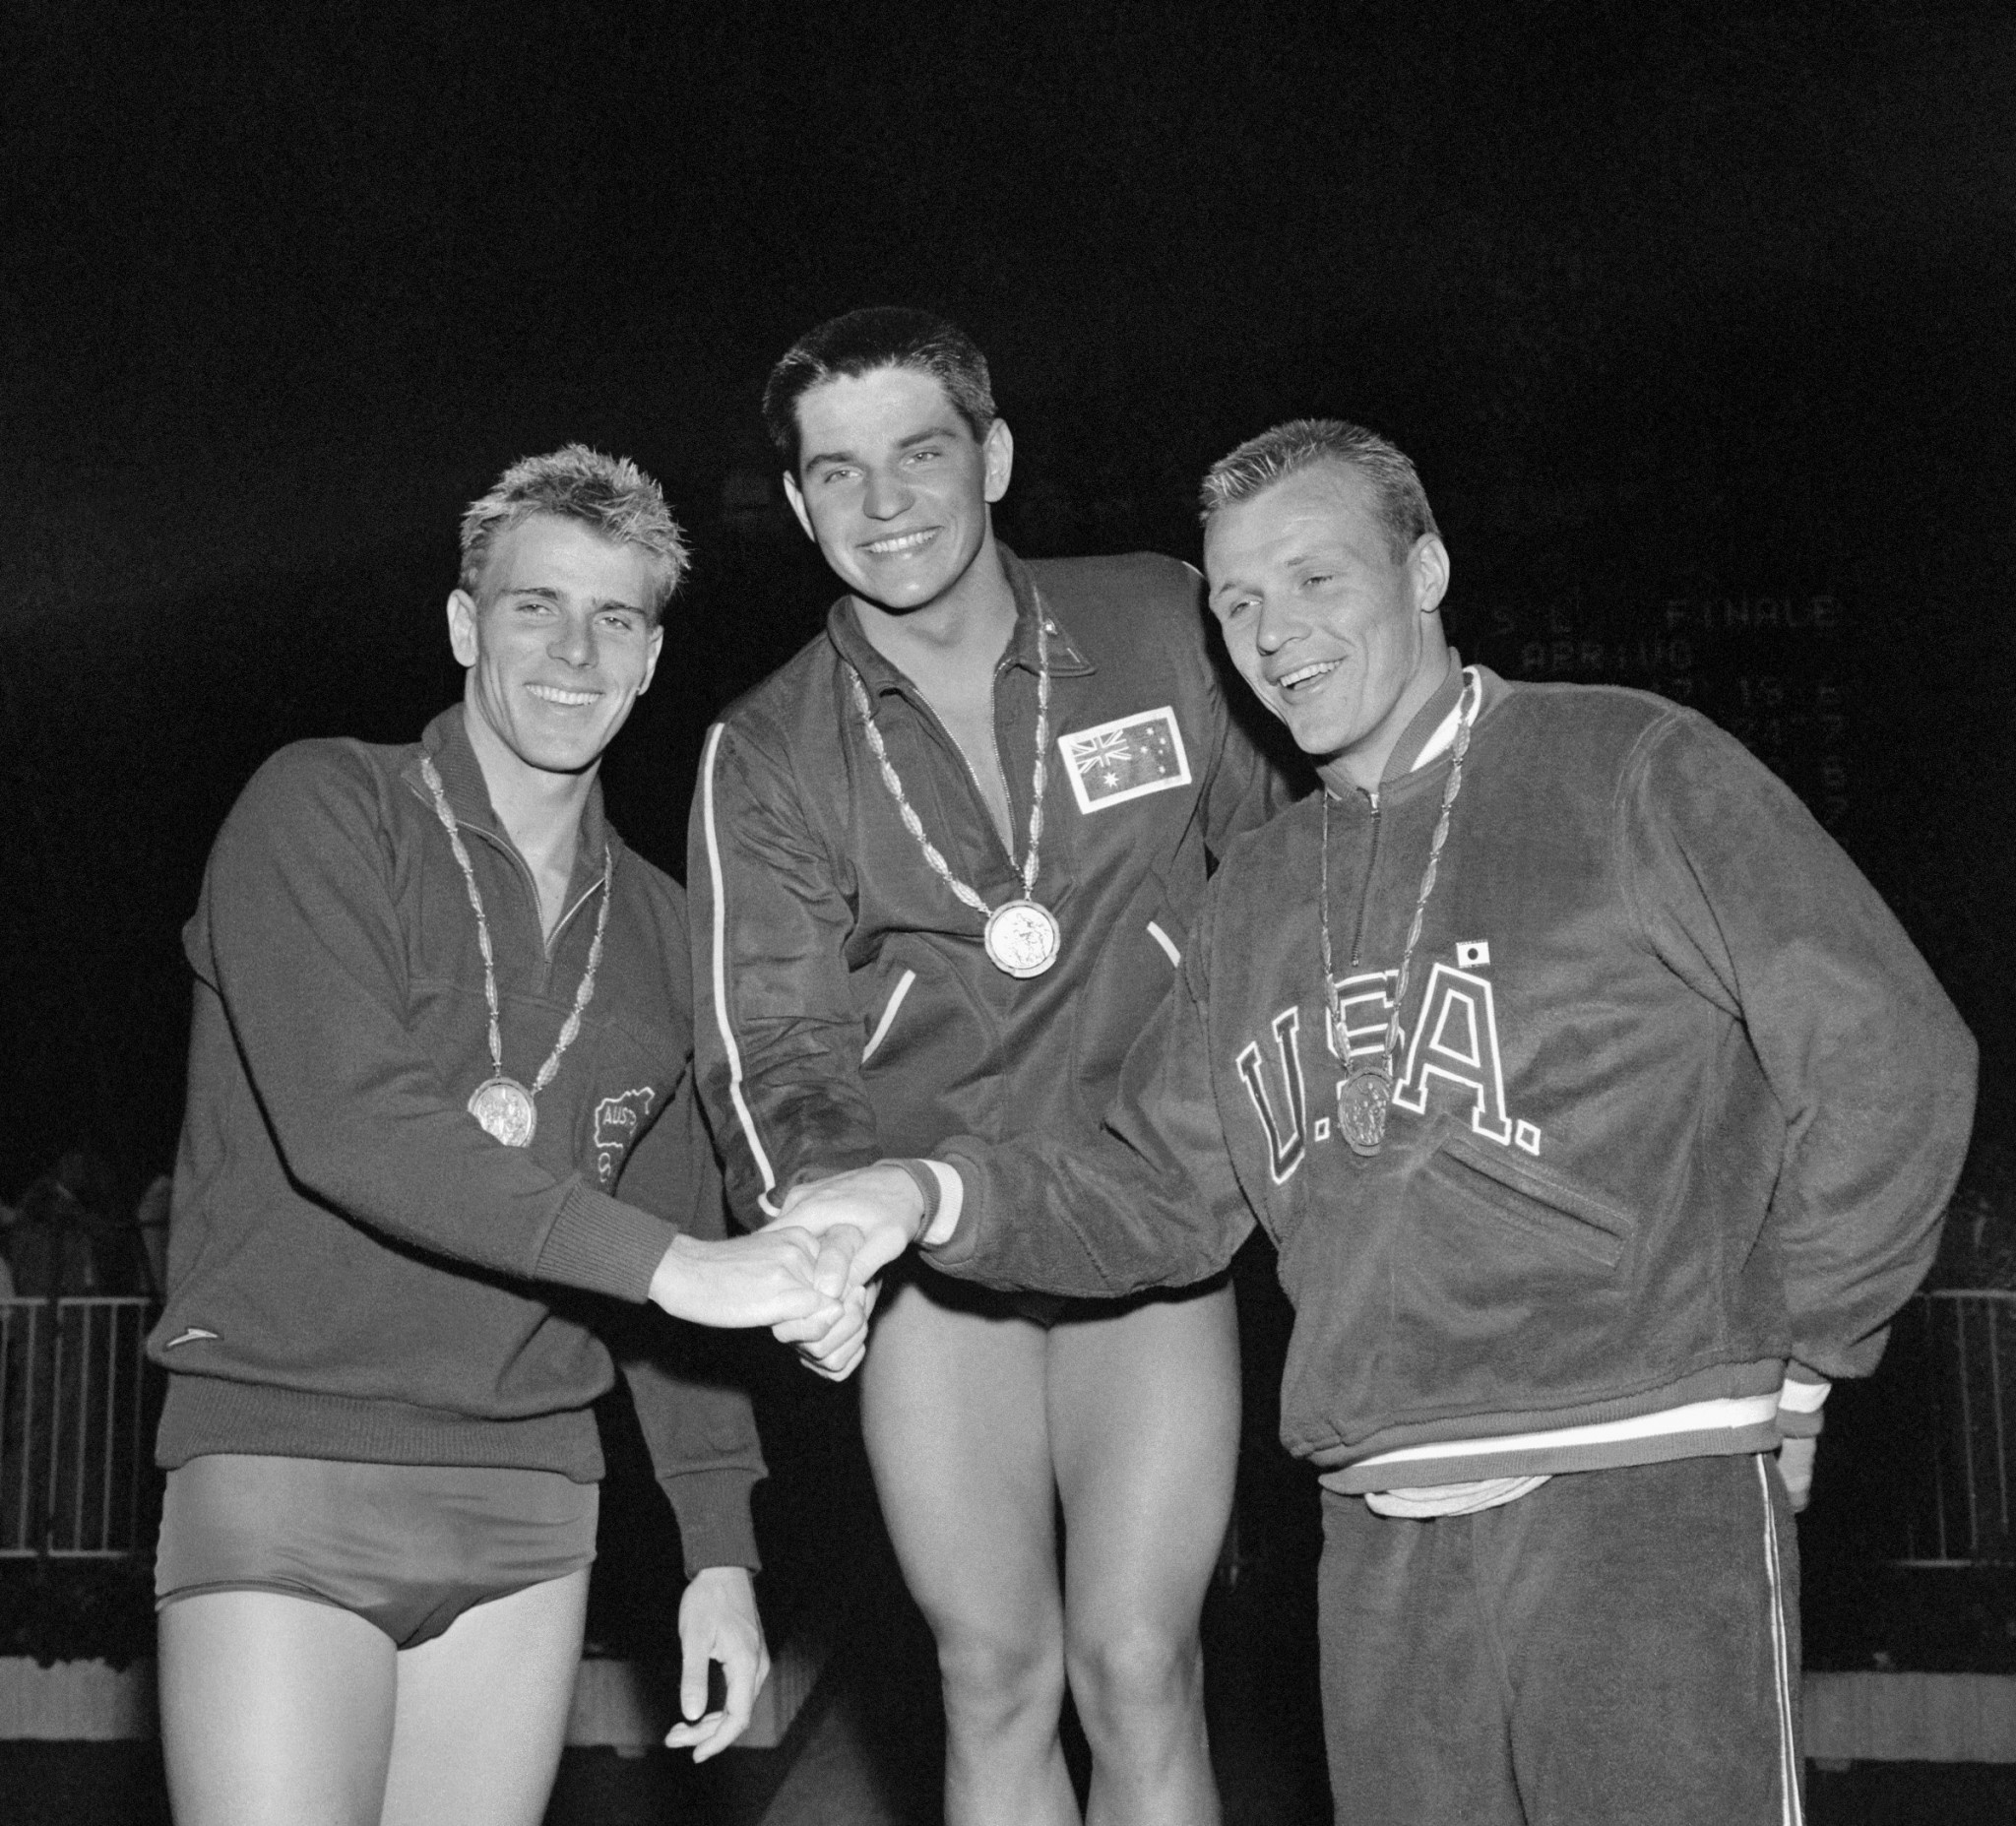 AOC President offers tribute after Olympic swimming great Konrads dies aged 78